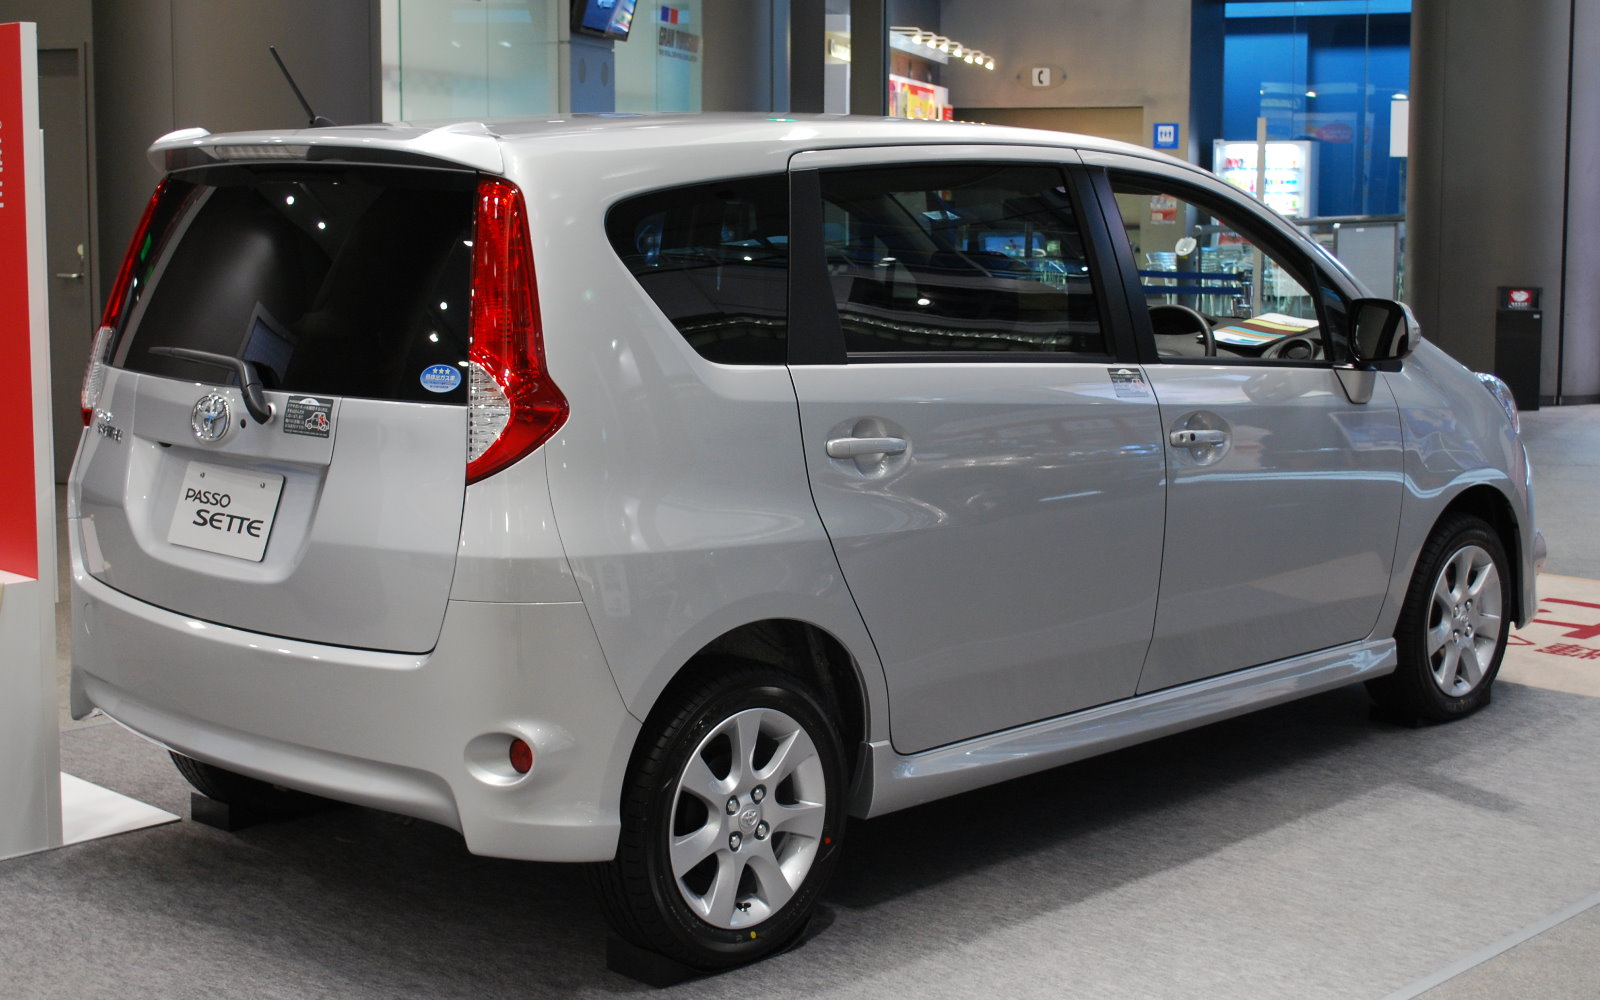 Toyota Passo Sette 2009: Review, Amazing Pictures and Images – Look at